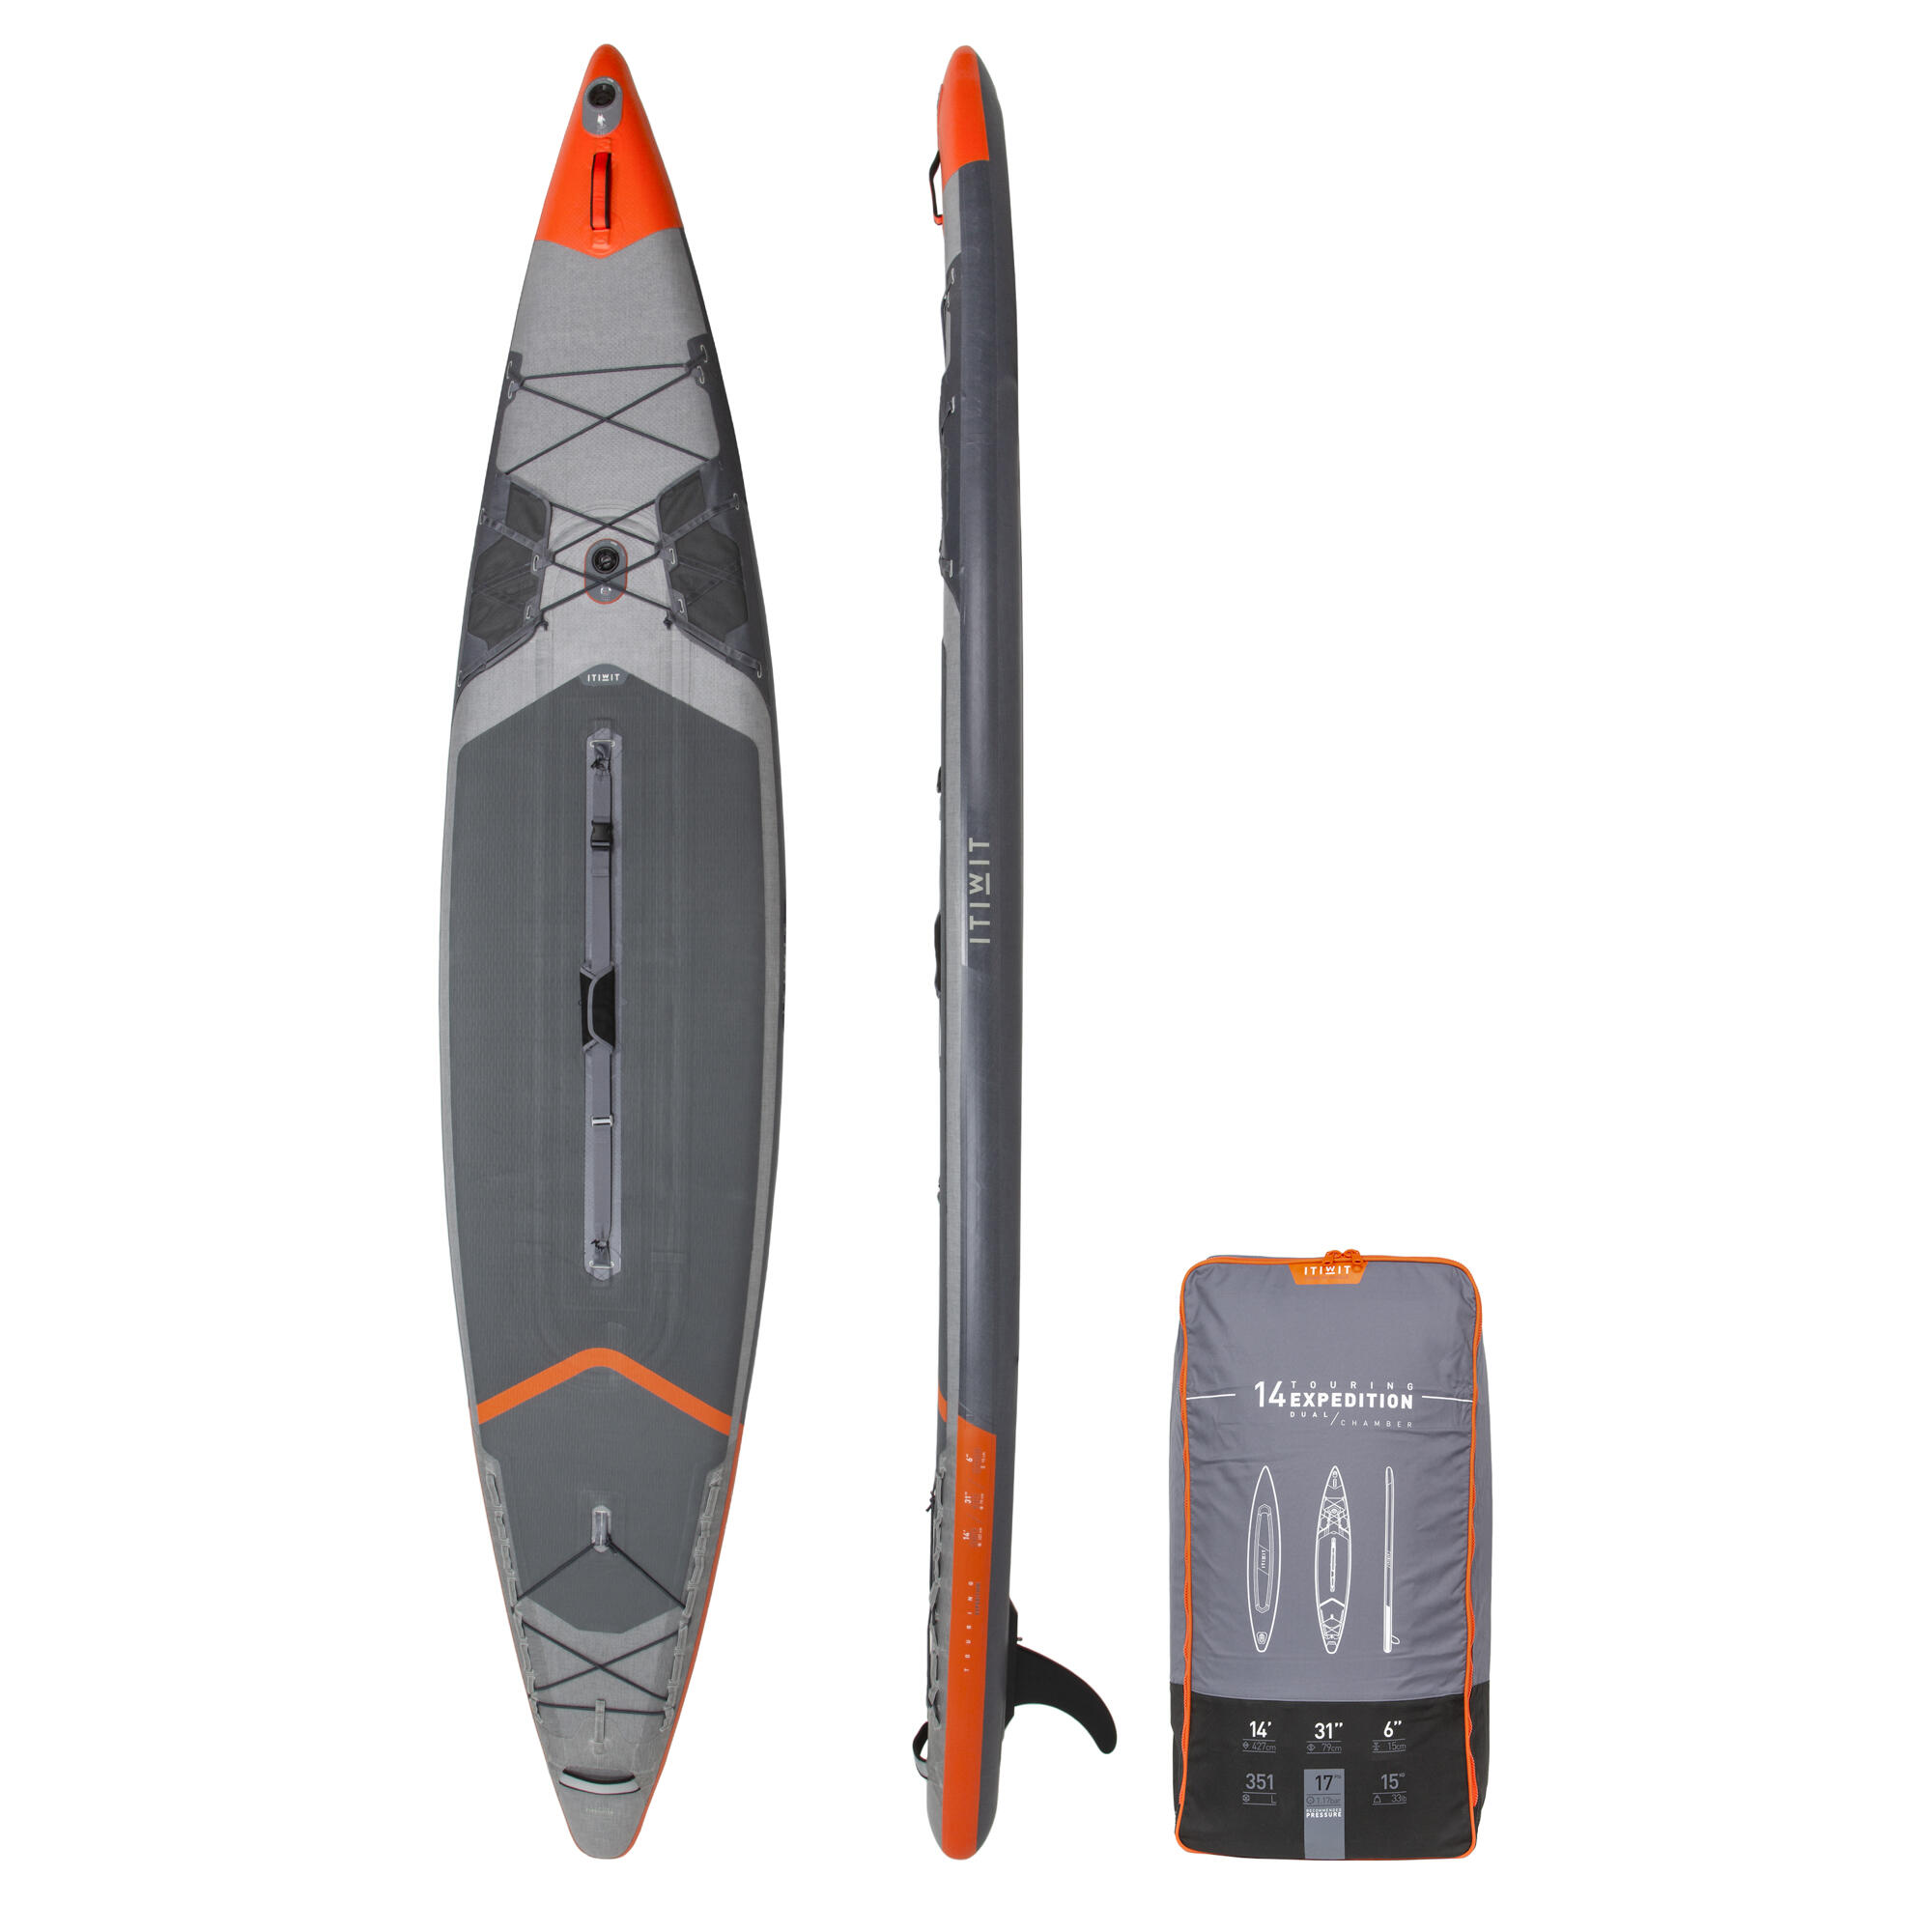 Itiwit X900 14ft Expedition Inflatable Stand-up Paddleboard (double Chamber)